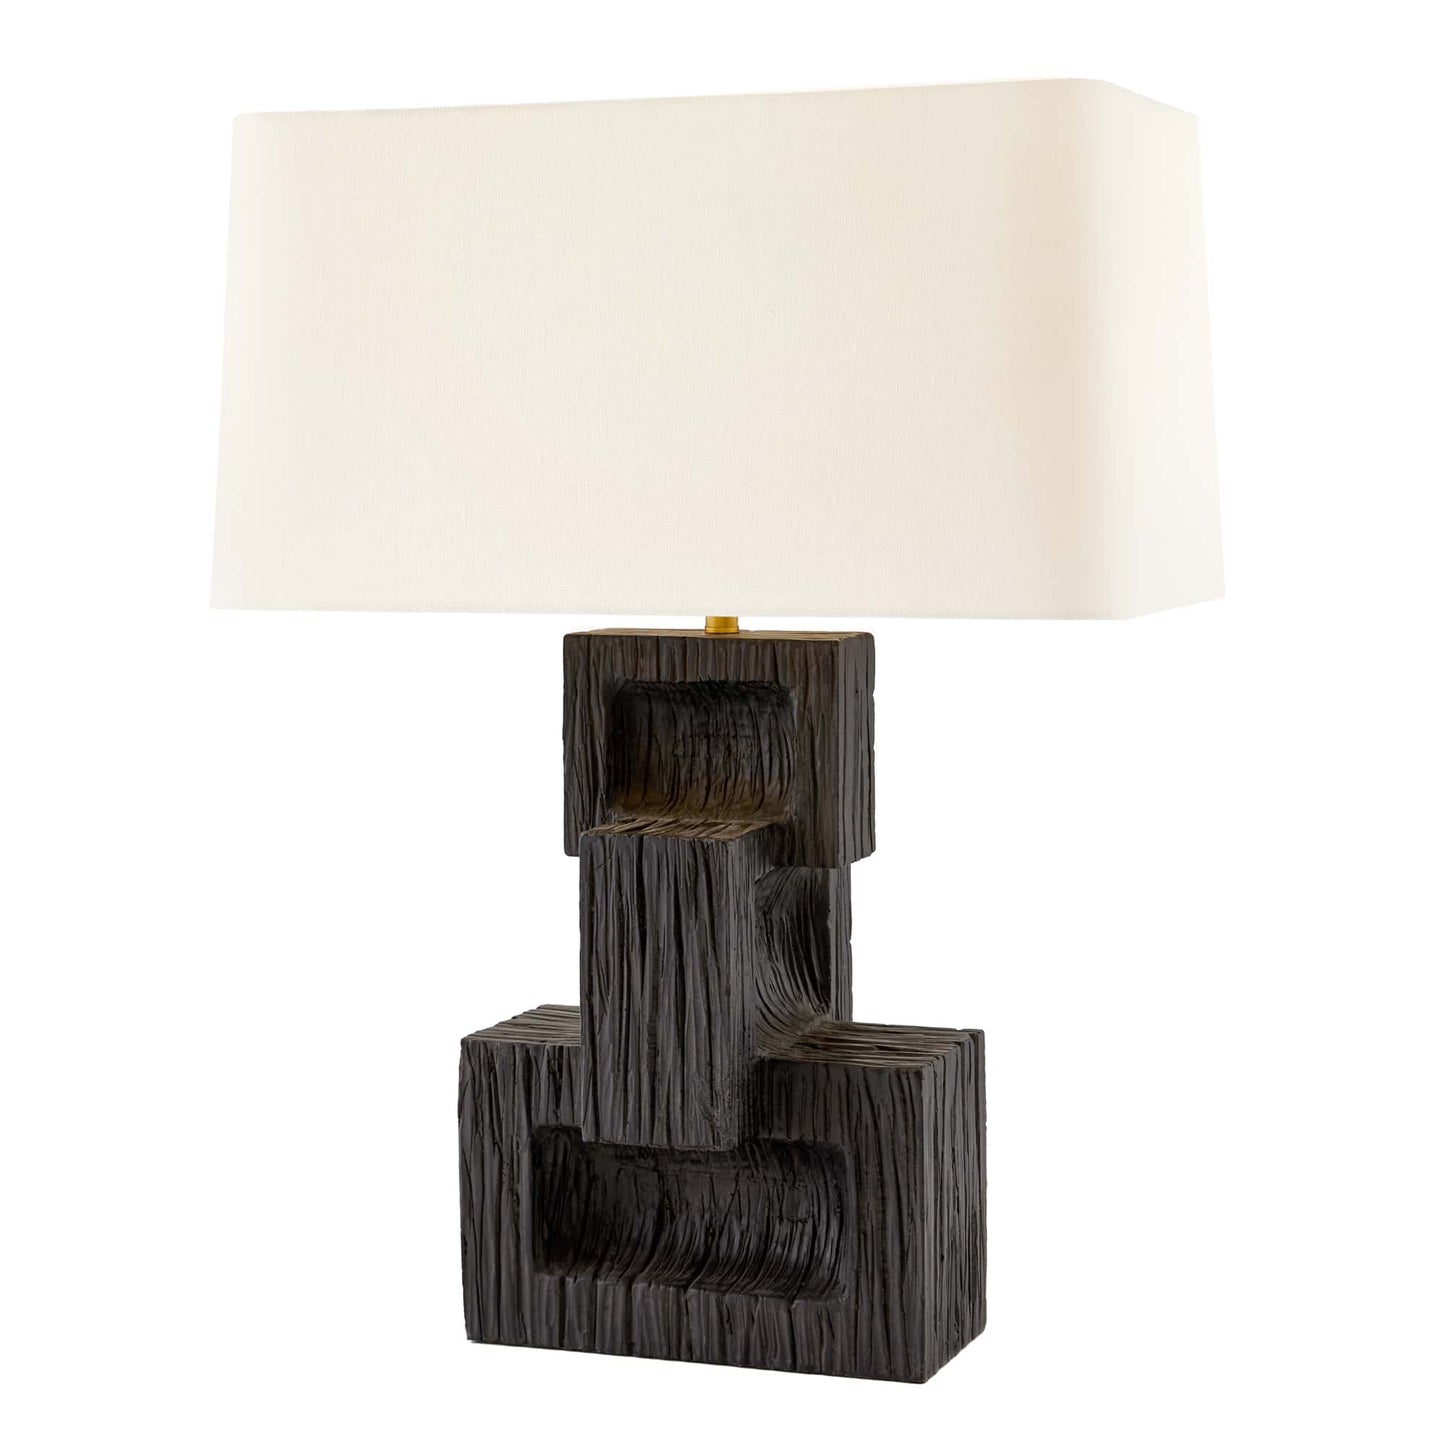 Rendor Lamp - Ebony Resin Table Lamp with Sculptural Chain-Link Design